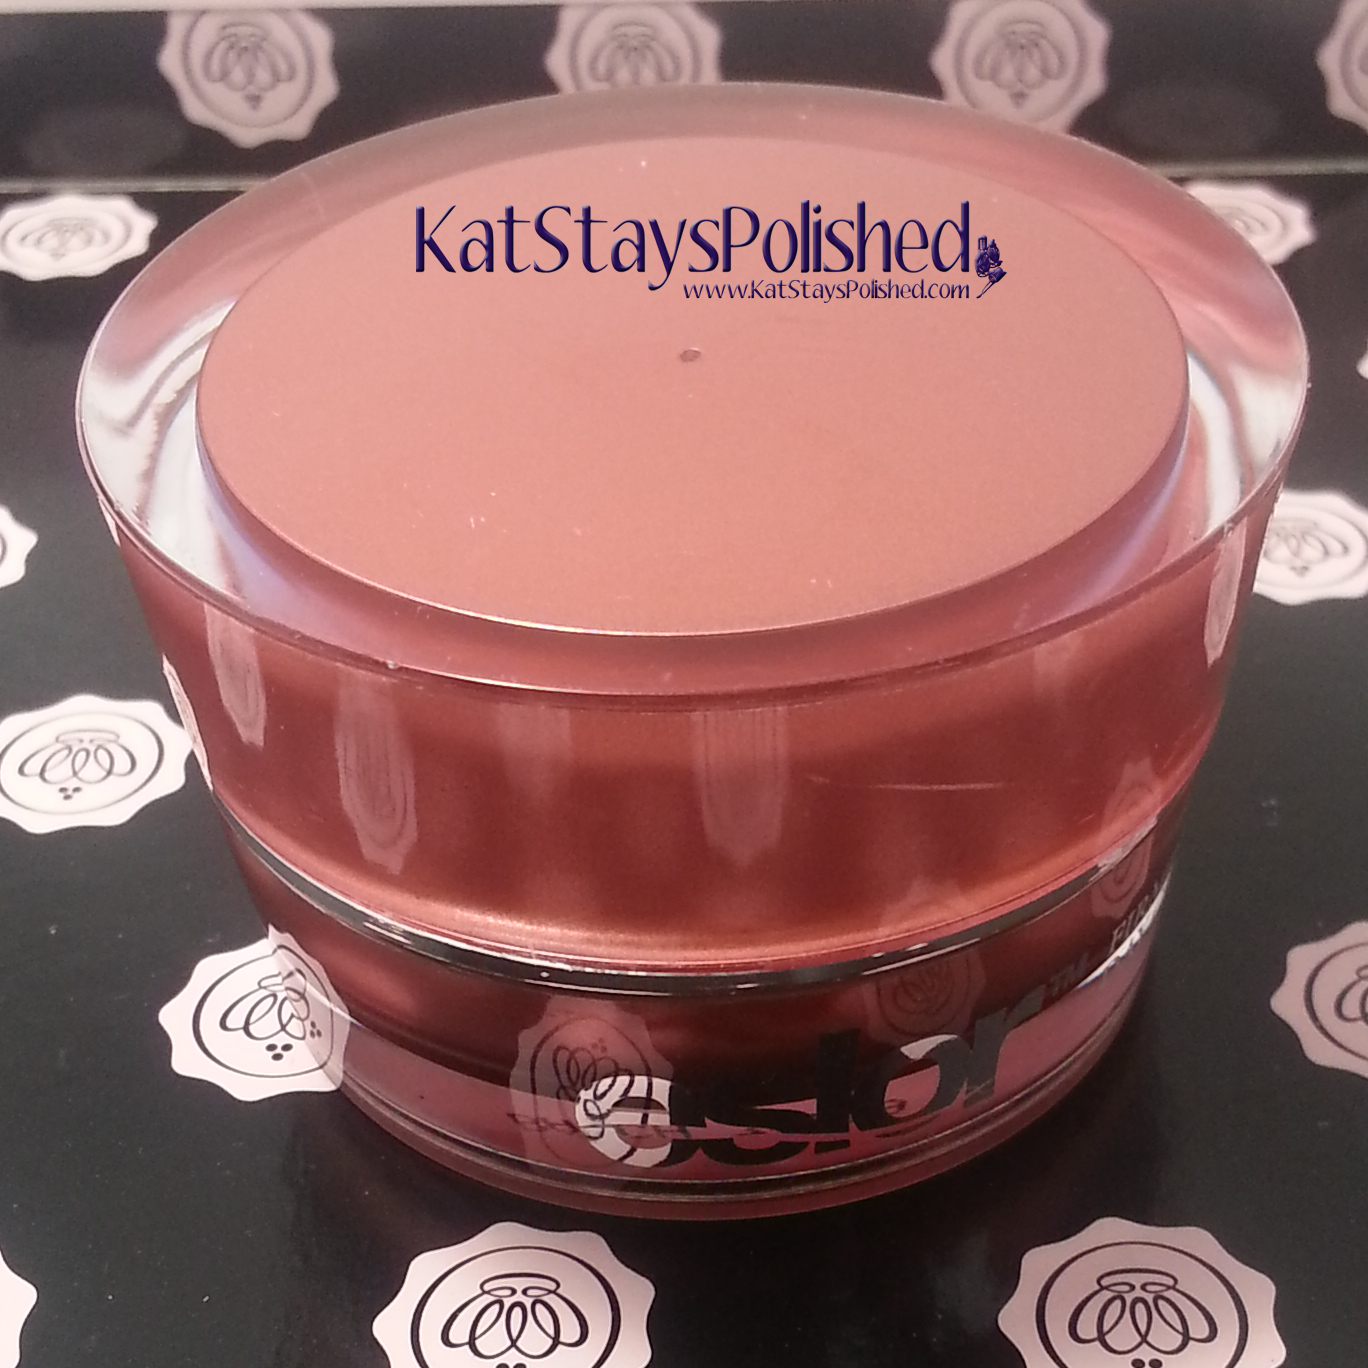 Glossybox - August 2014 - Eslor Firming Collagen Day Cream | Kat Stays Polished